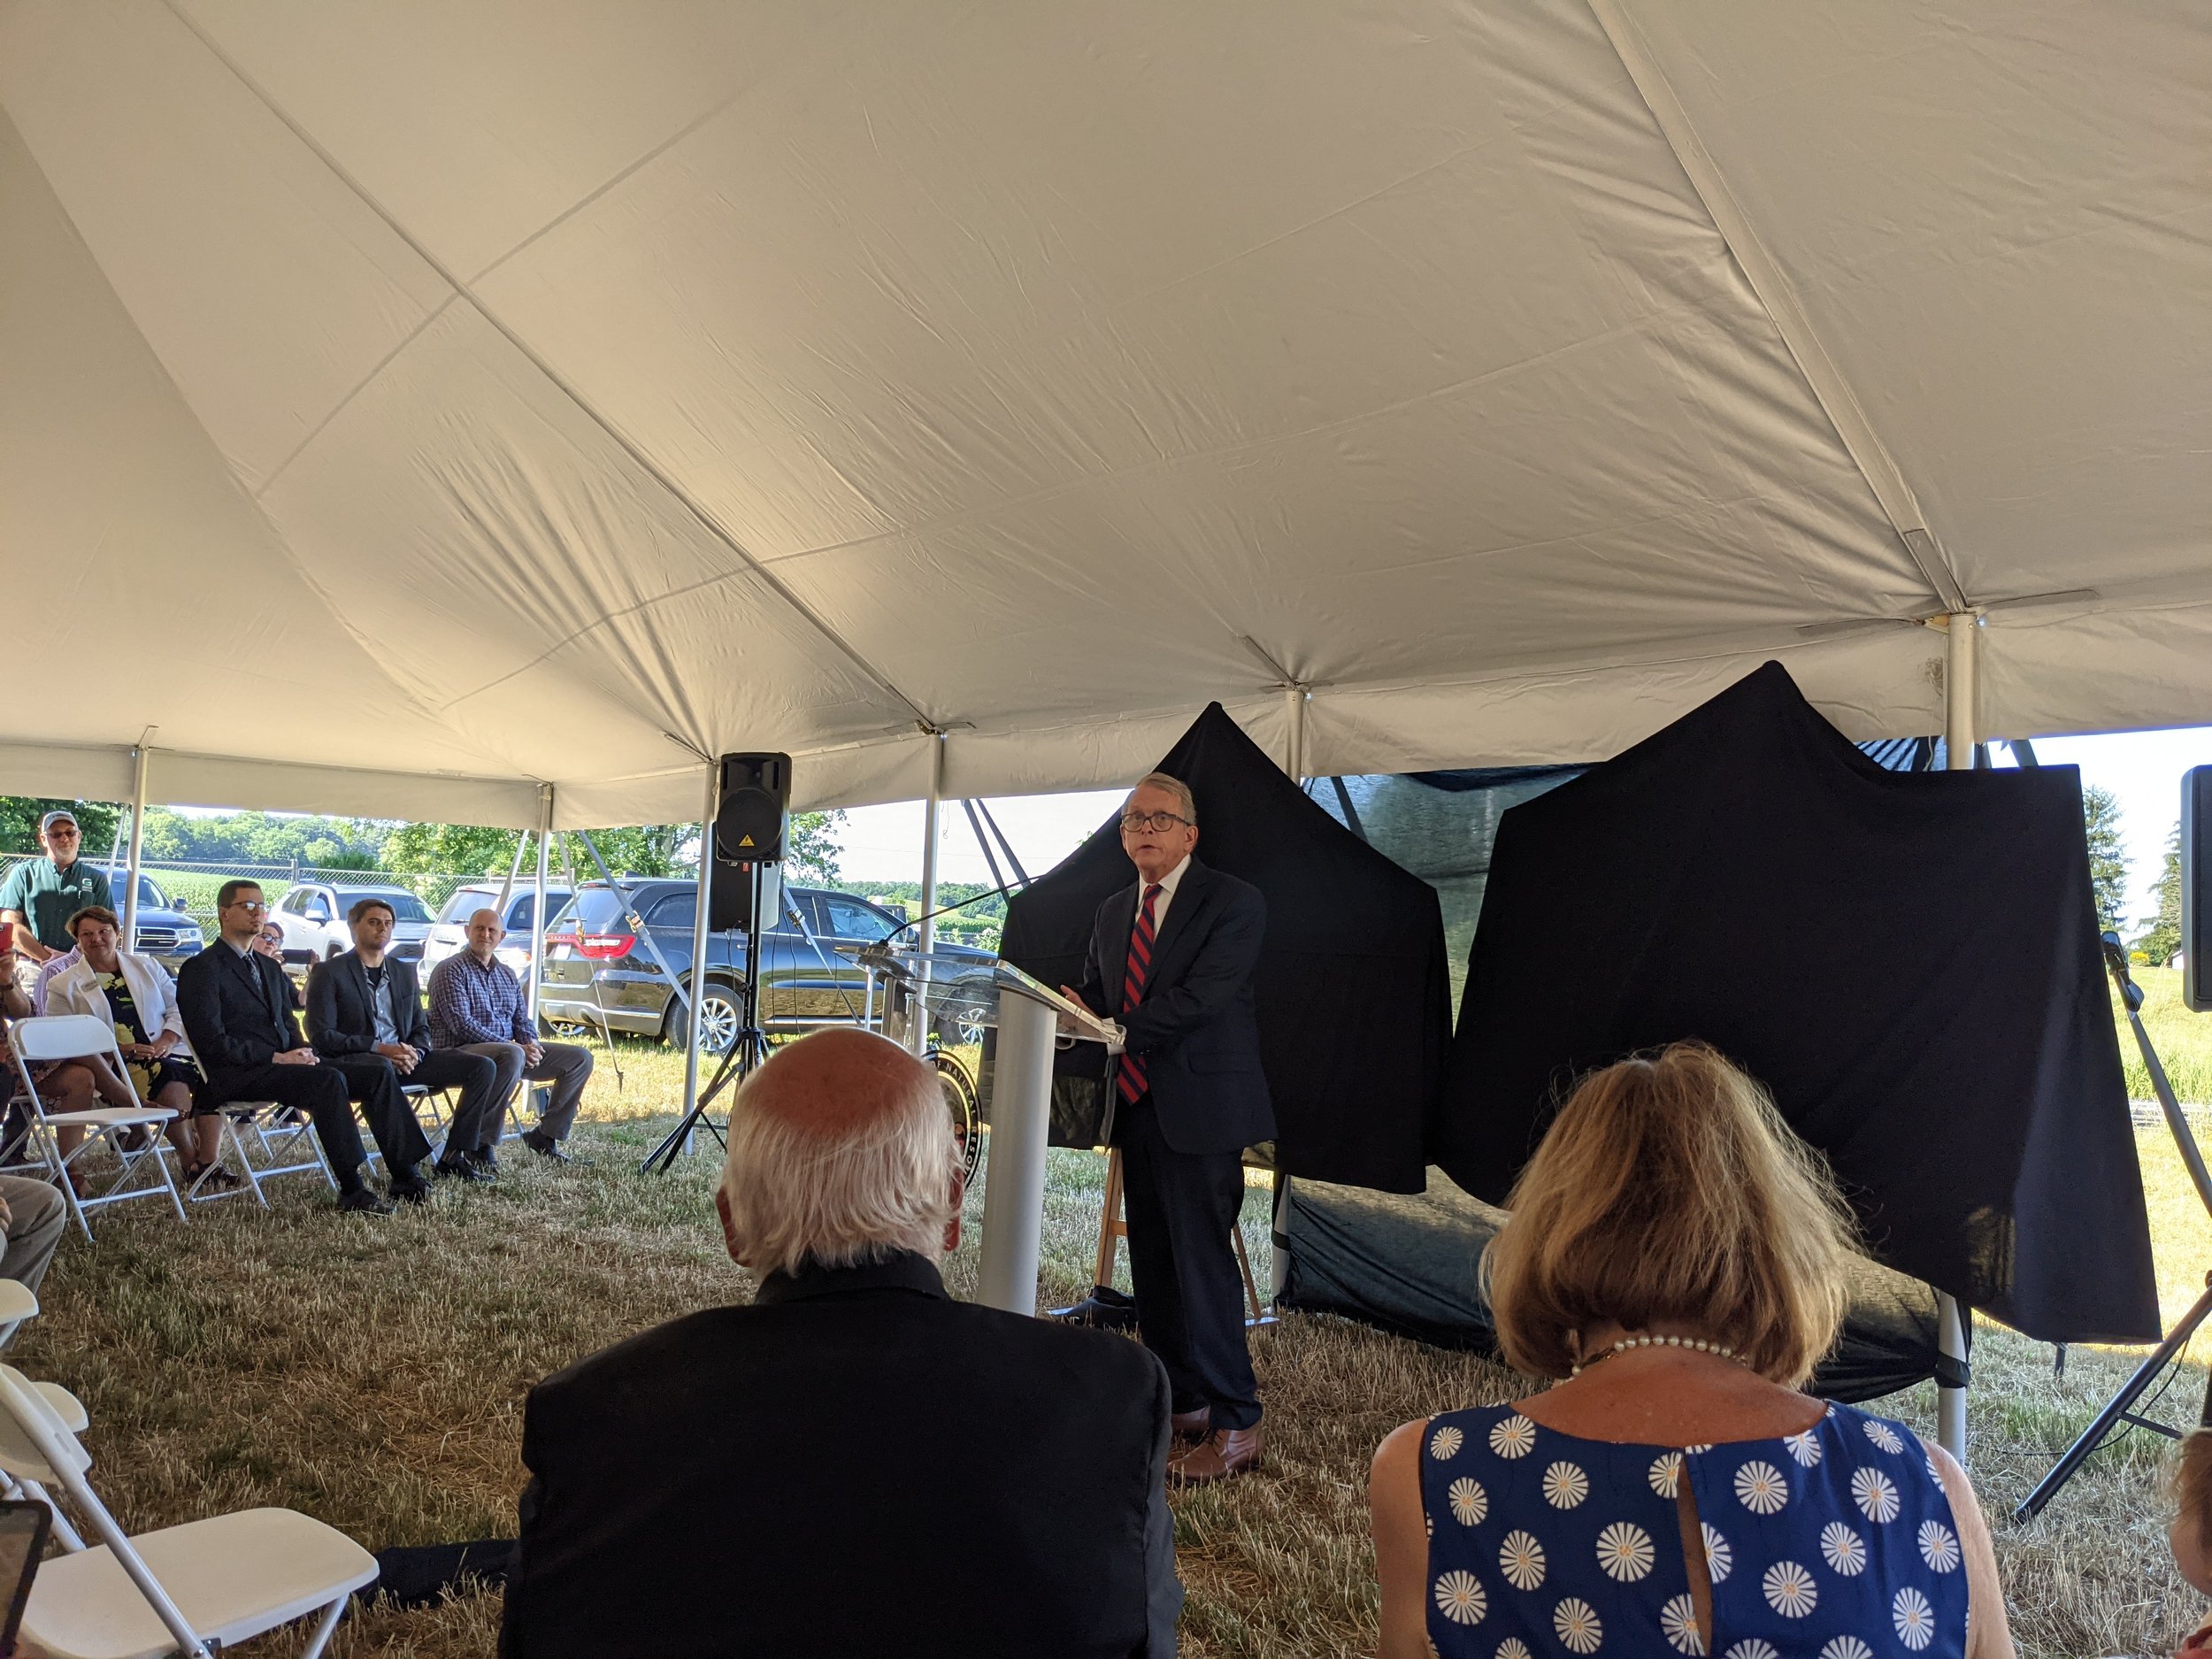  Ohio Gov. Mike DeWine, who grew up in nearby Yellow Springs, spoke at the groundbreaking. 